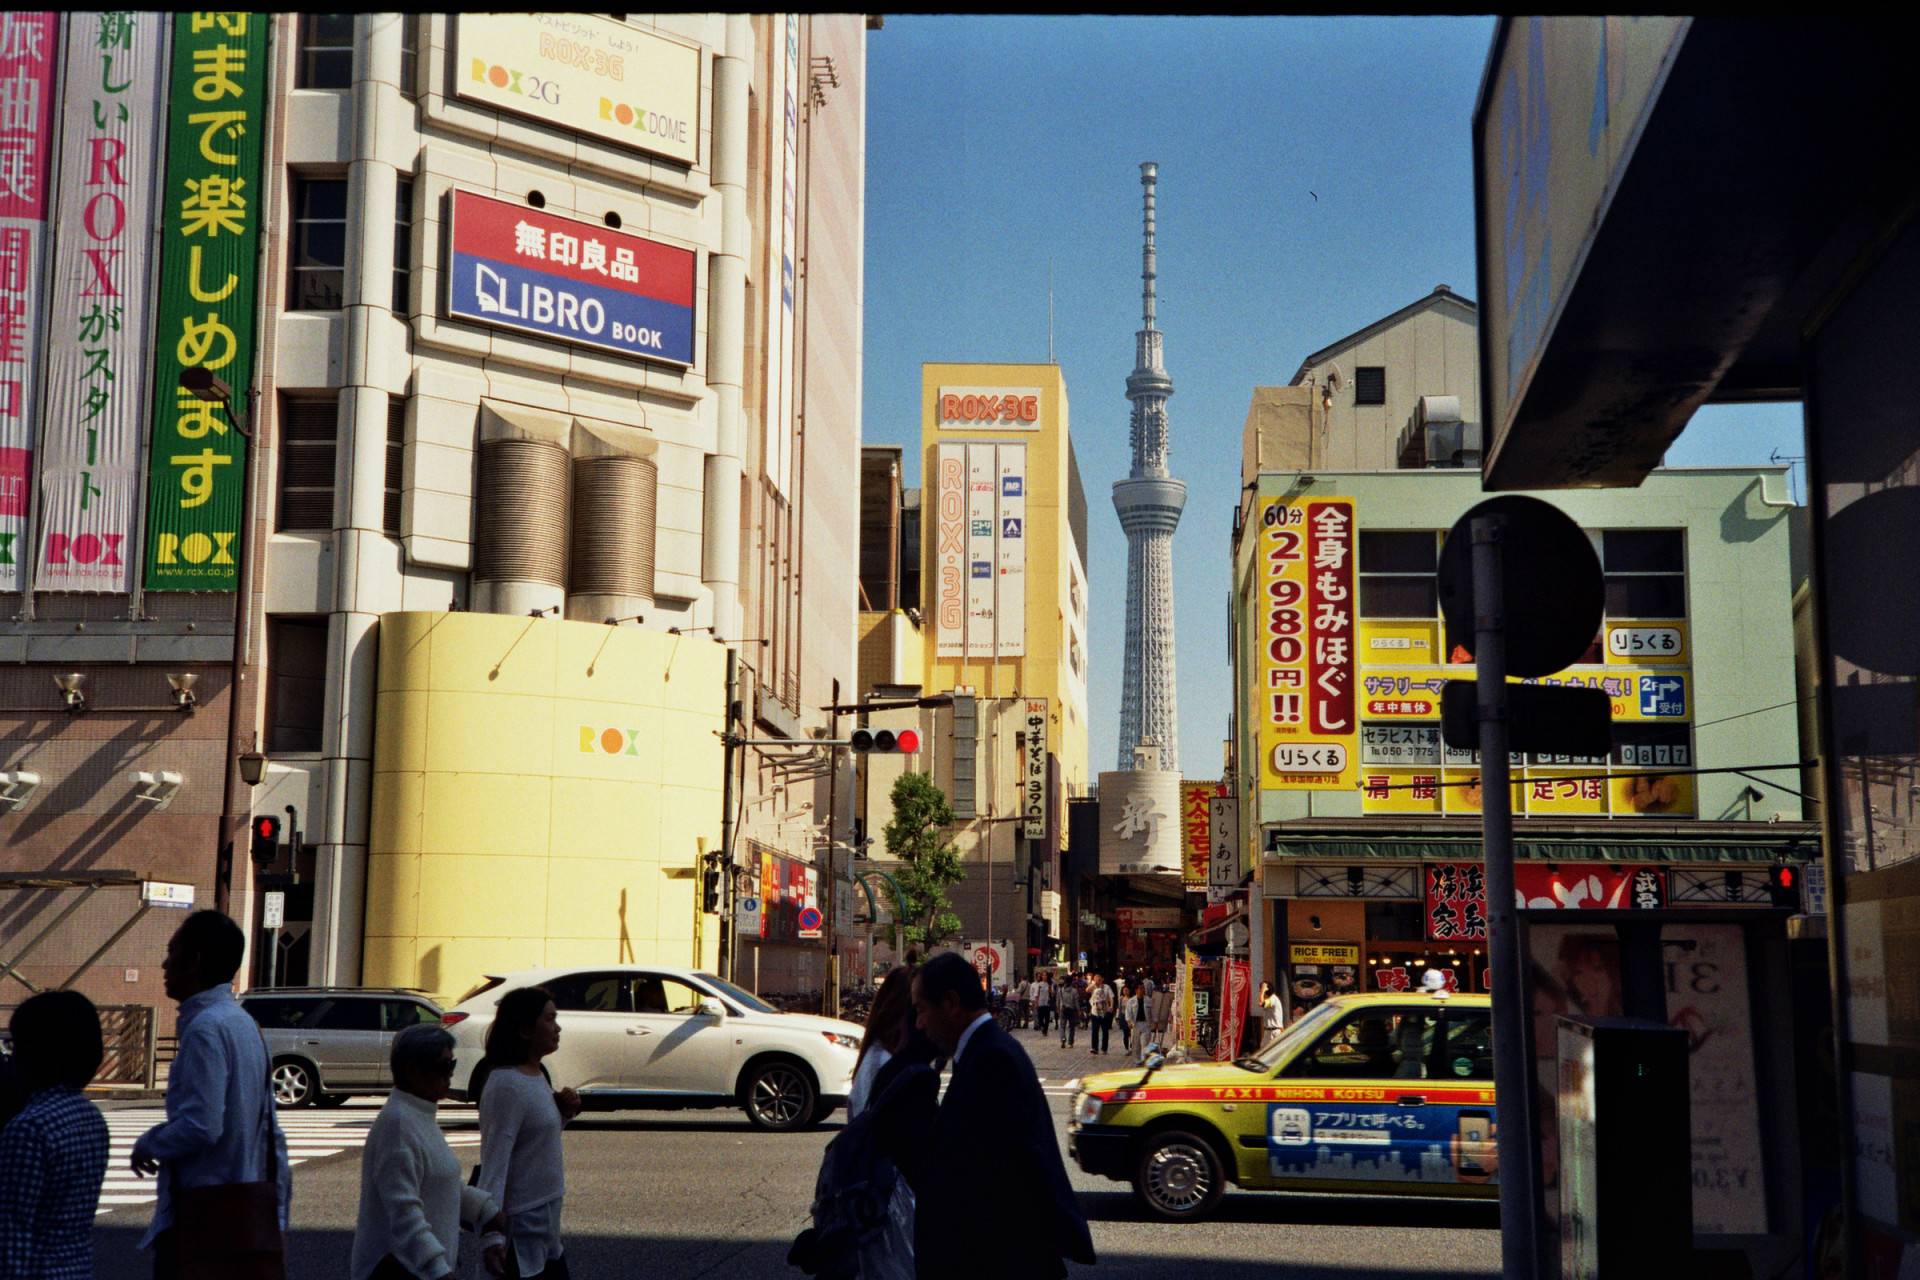 view of a busy pedestrian street seen from the other side of the intersecting main street, buildings around the street are covered with signs, there is a tower on the background